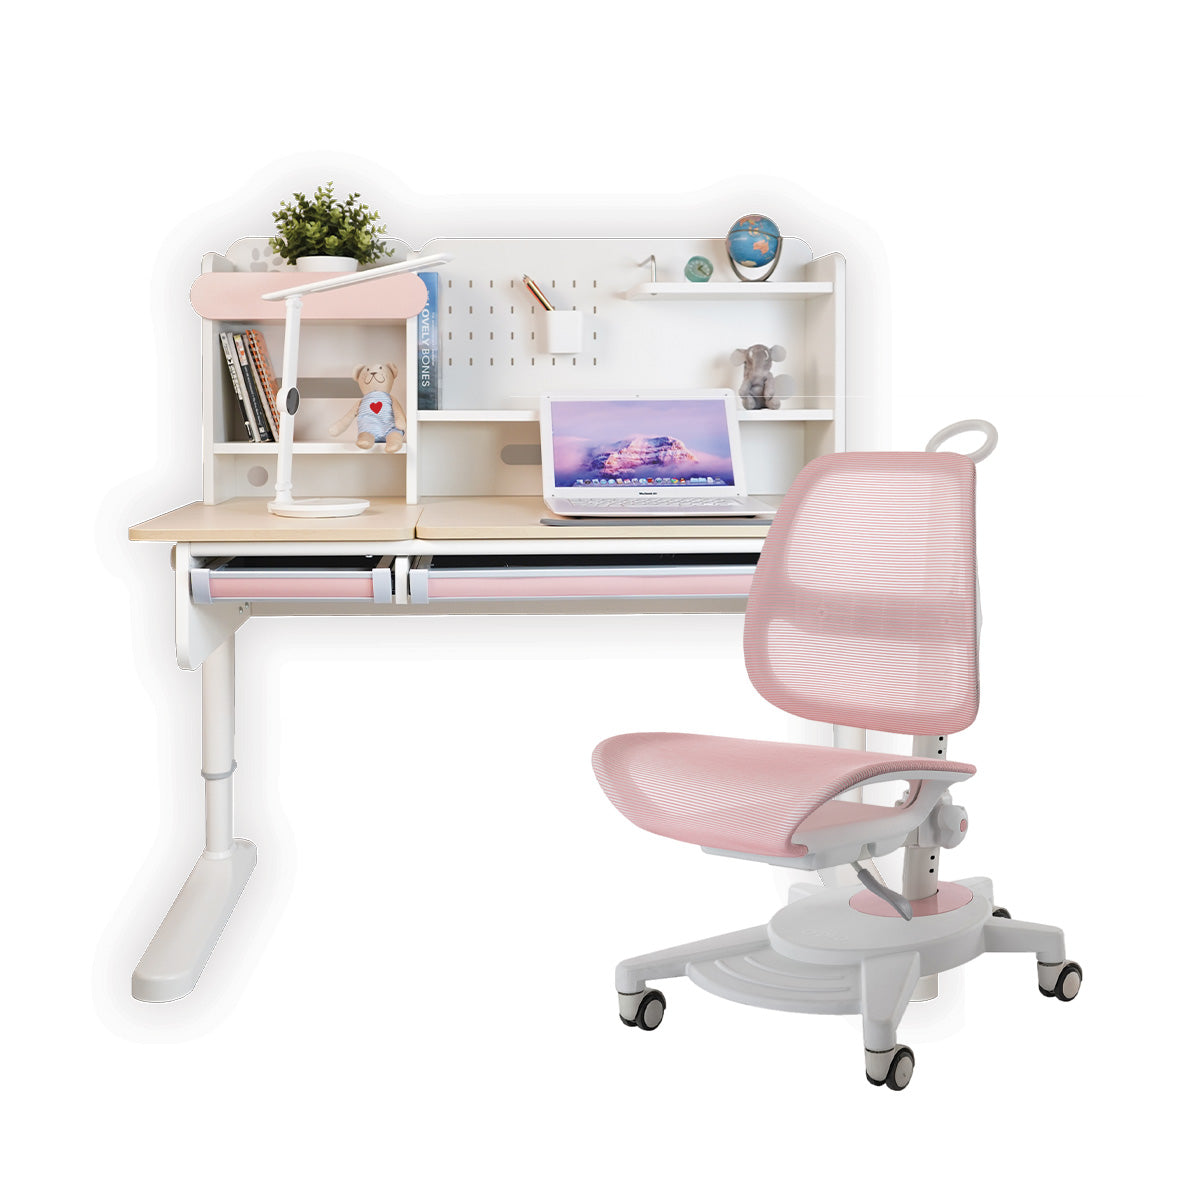 Impact Ergo-Growing Study Desk And Chair Set 1200mm x 650mm, IM-G1200A (Ready Stocks)